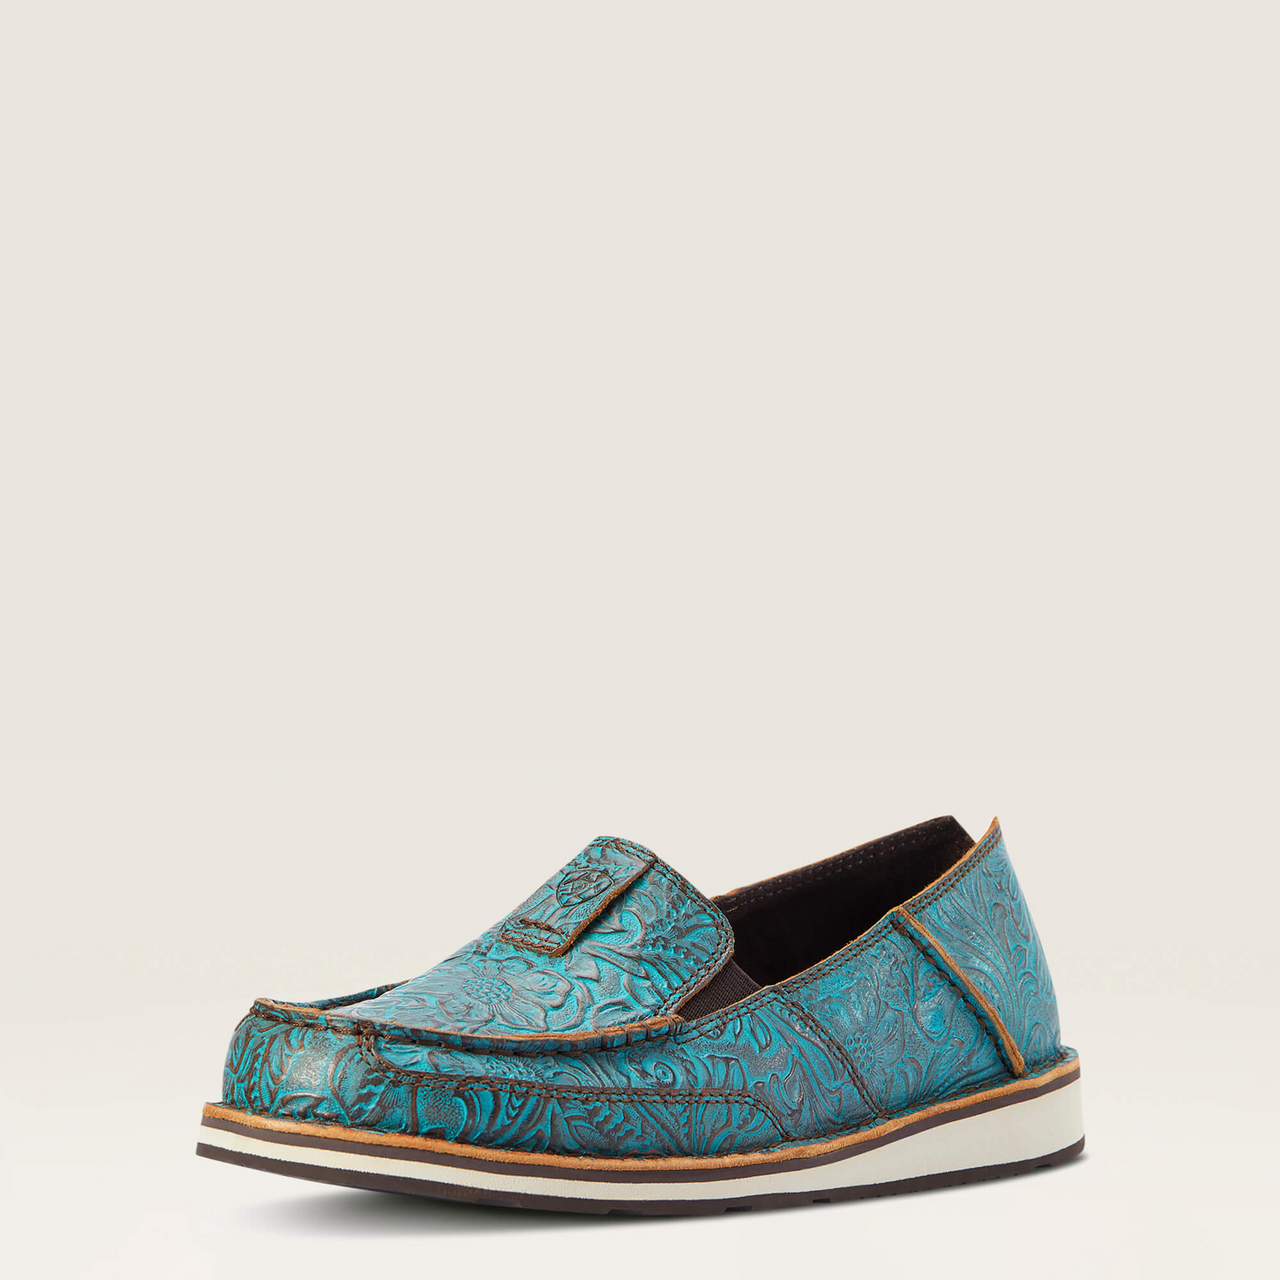 **Ariat Womens Cruiser Shoes - Brushed Turquoise Floral Embossed